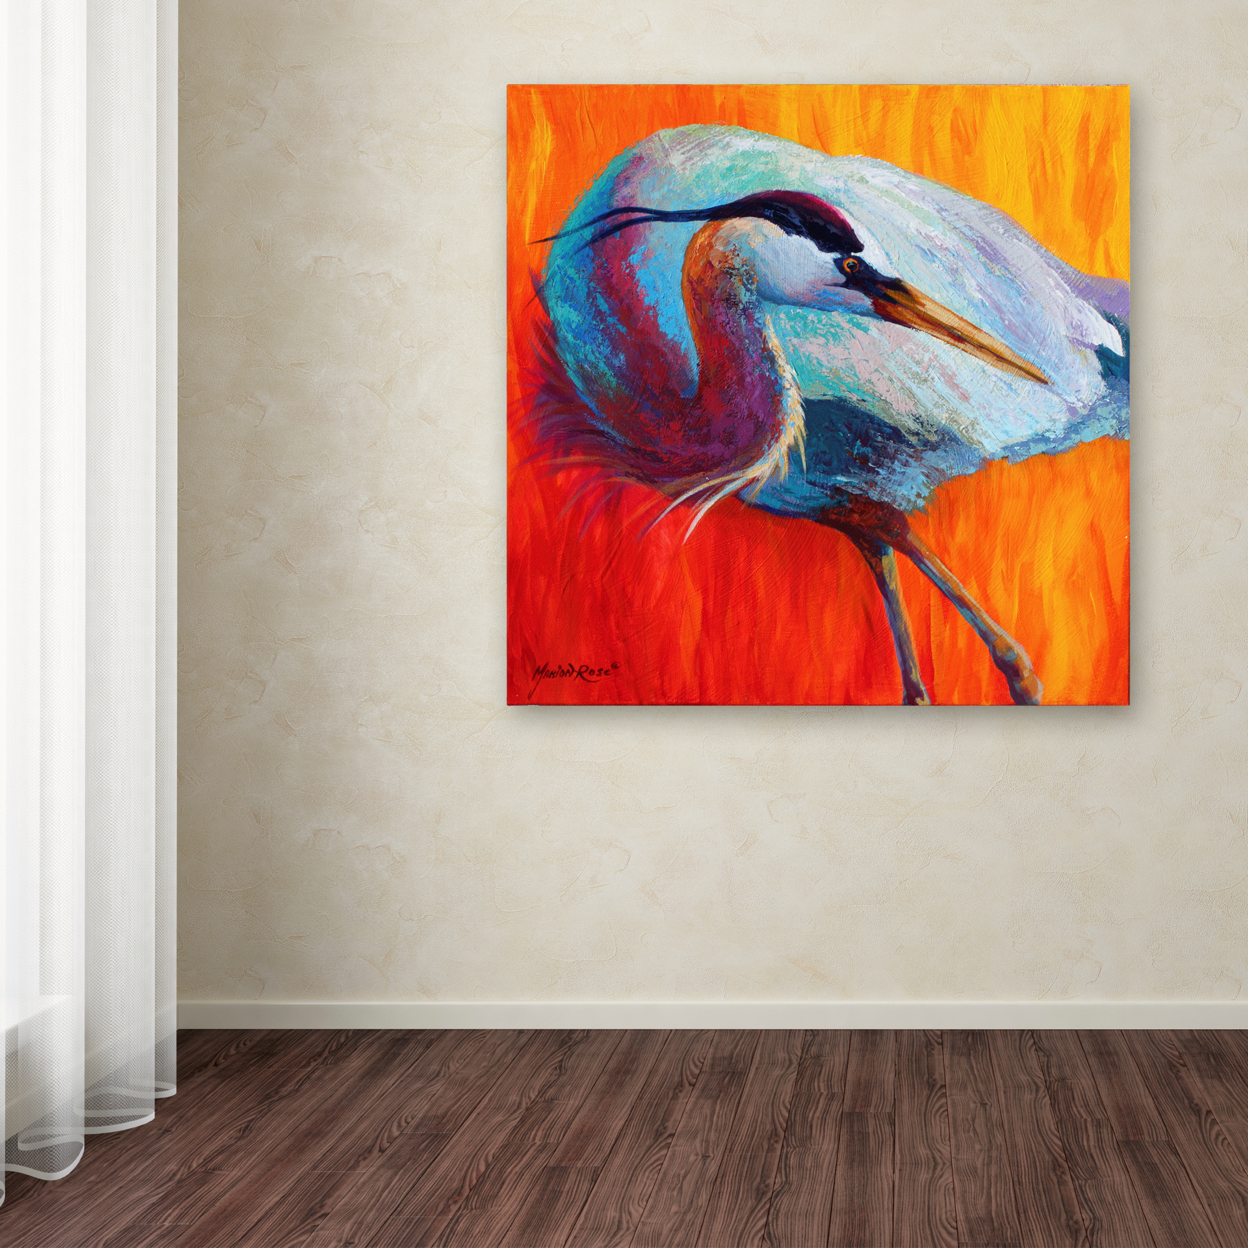 Marion Rose 'Glance Heron' Ready To Hang Canvas Art 35 X 35 Inches Made In USA